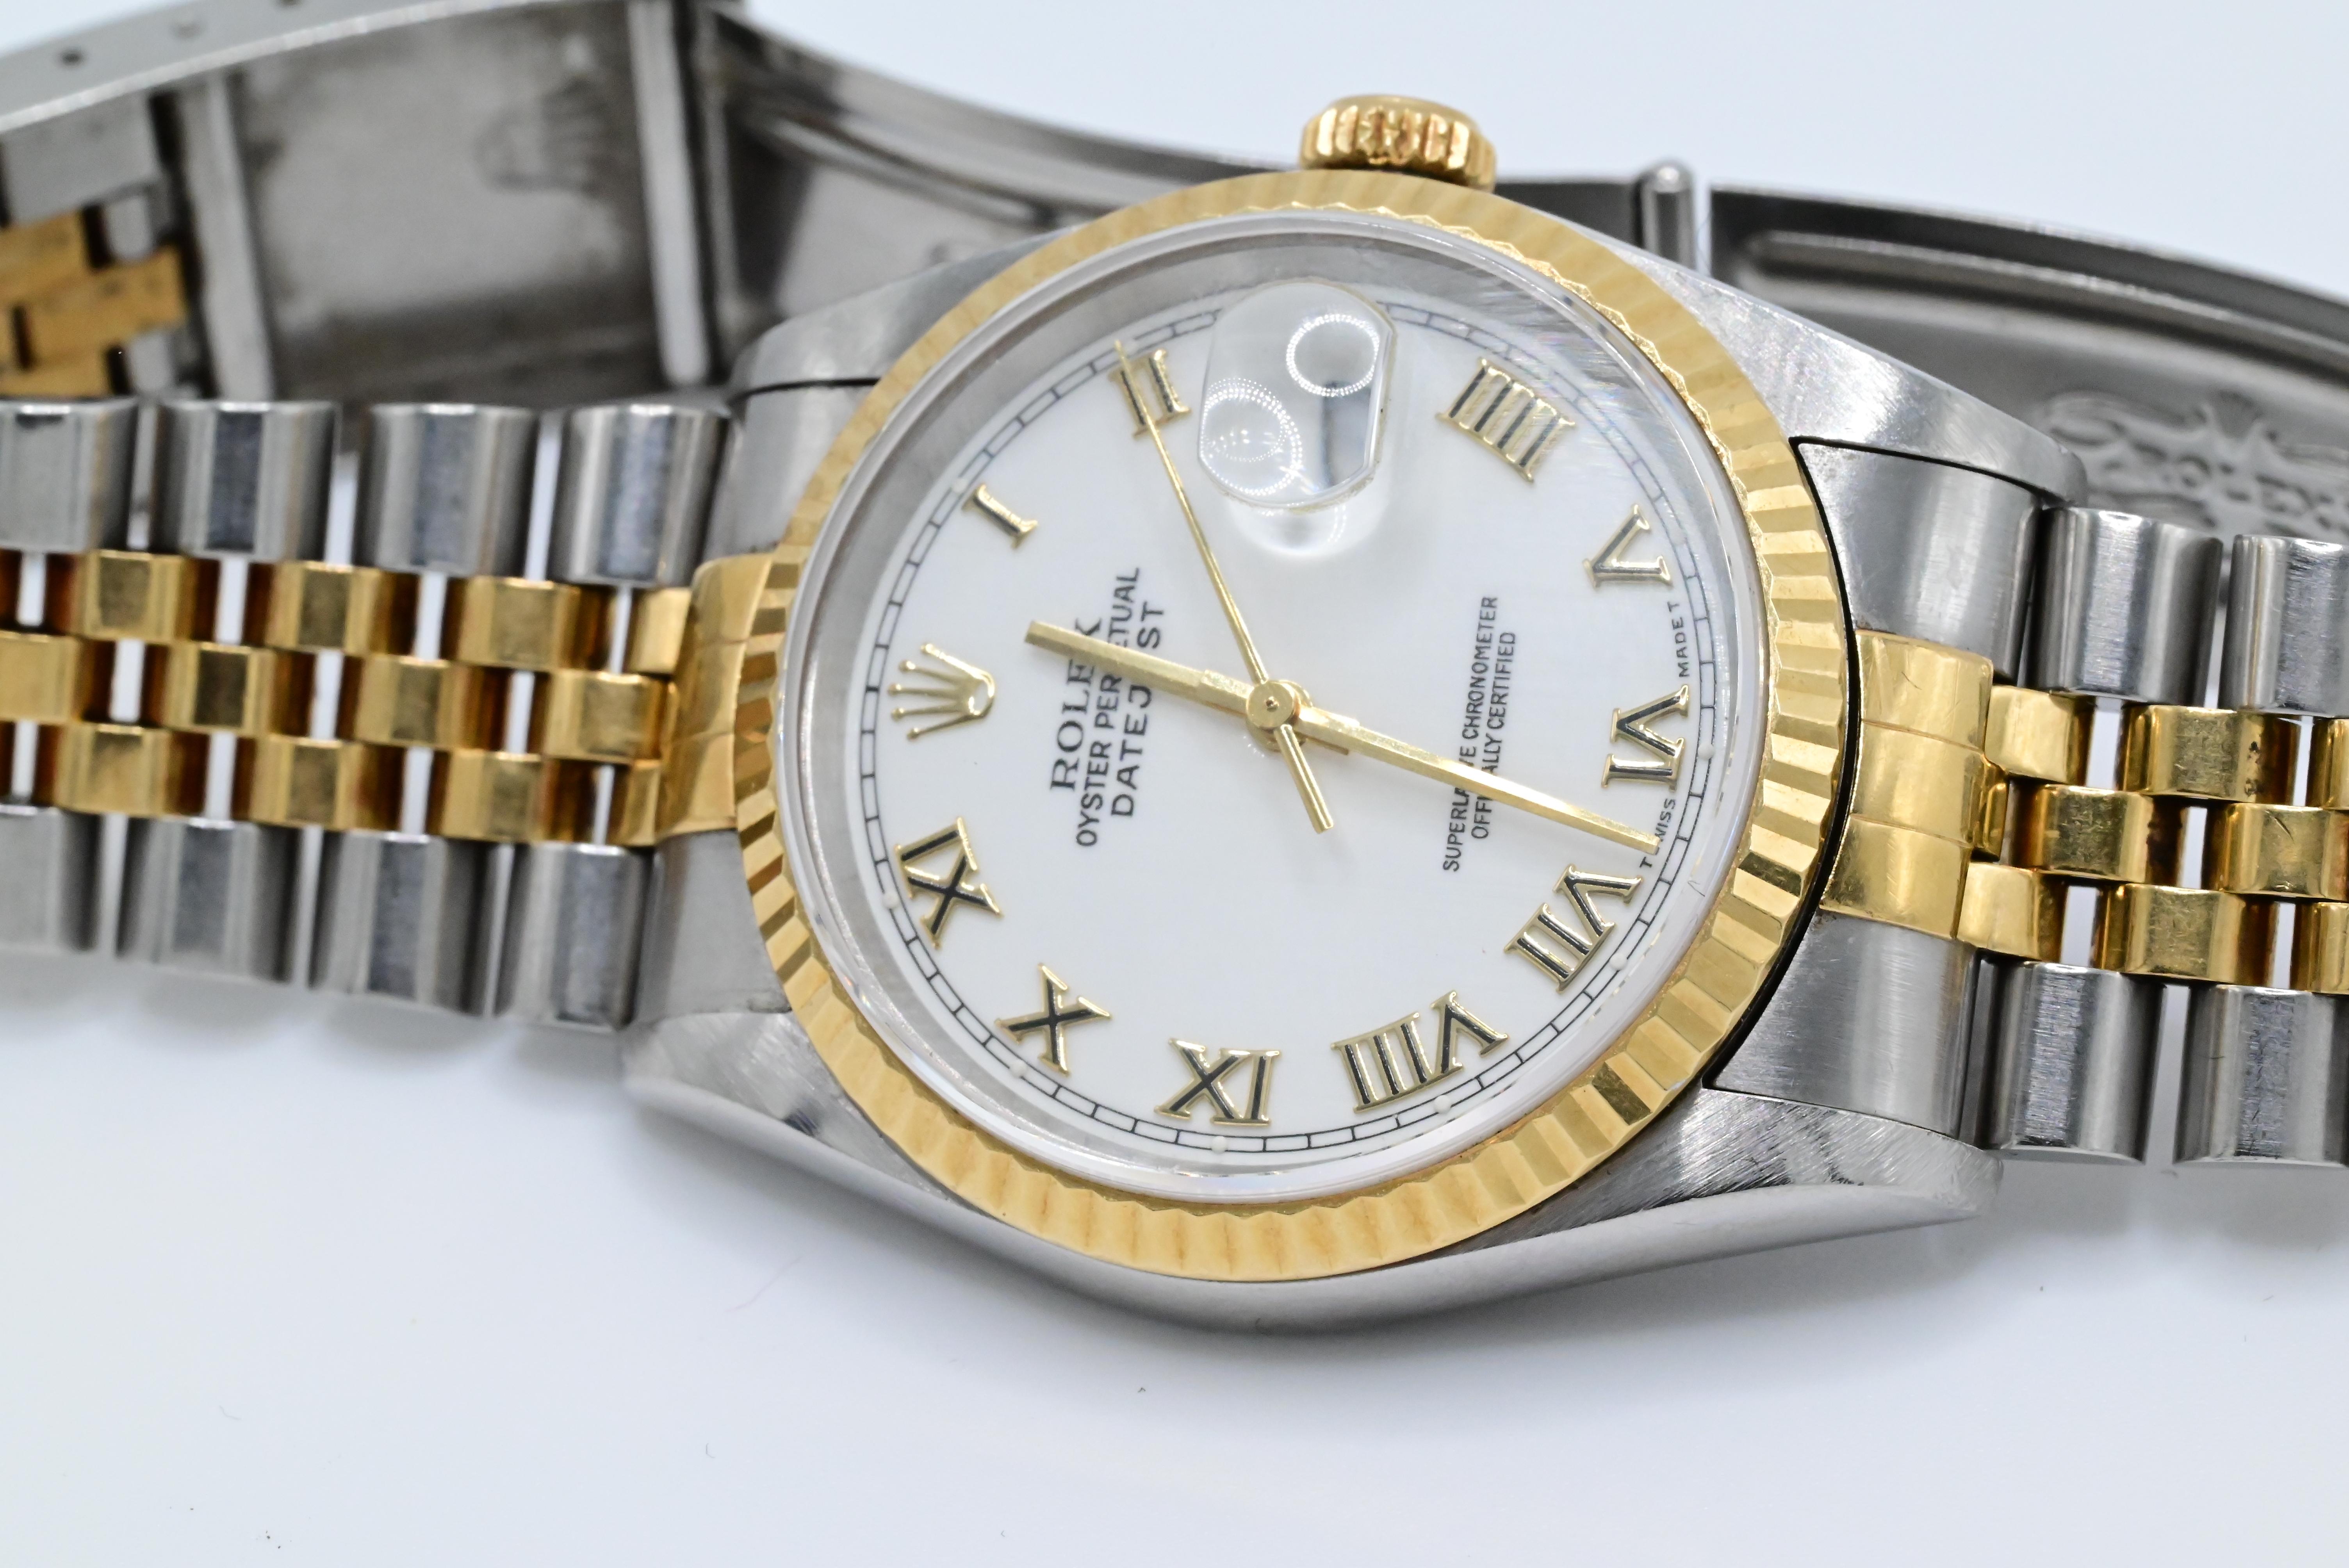 Exceptional Rolex Perpetual Oyster Two Tone Roman Numeral Dial Watch 2